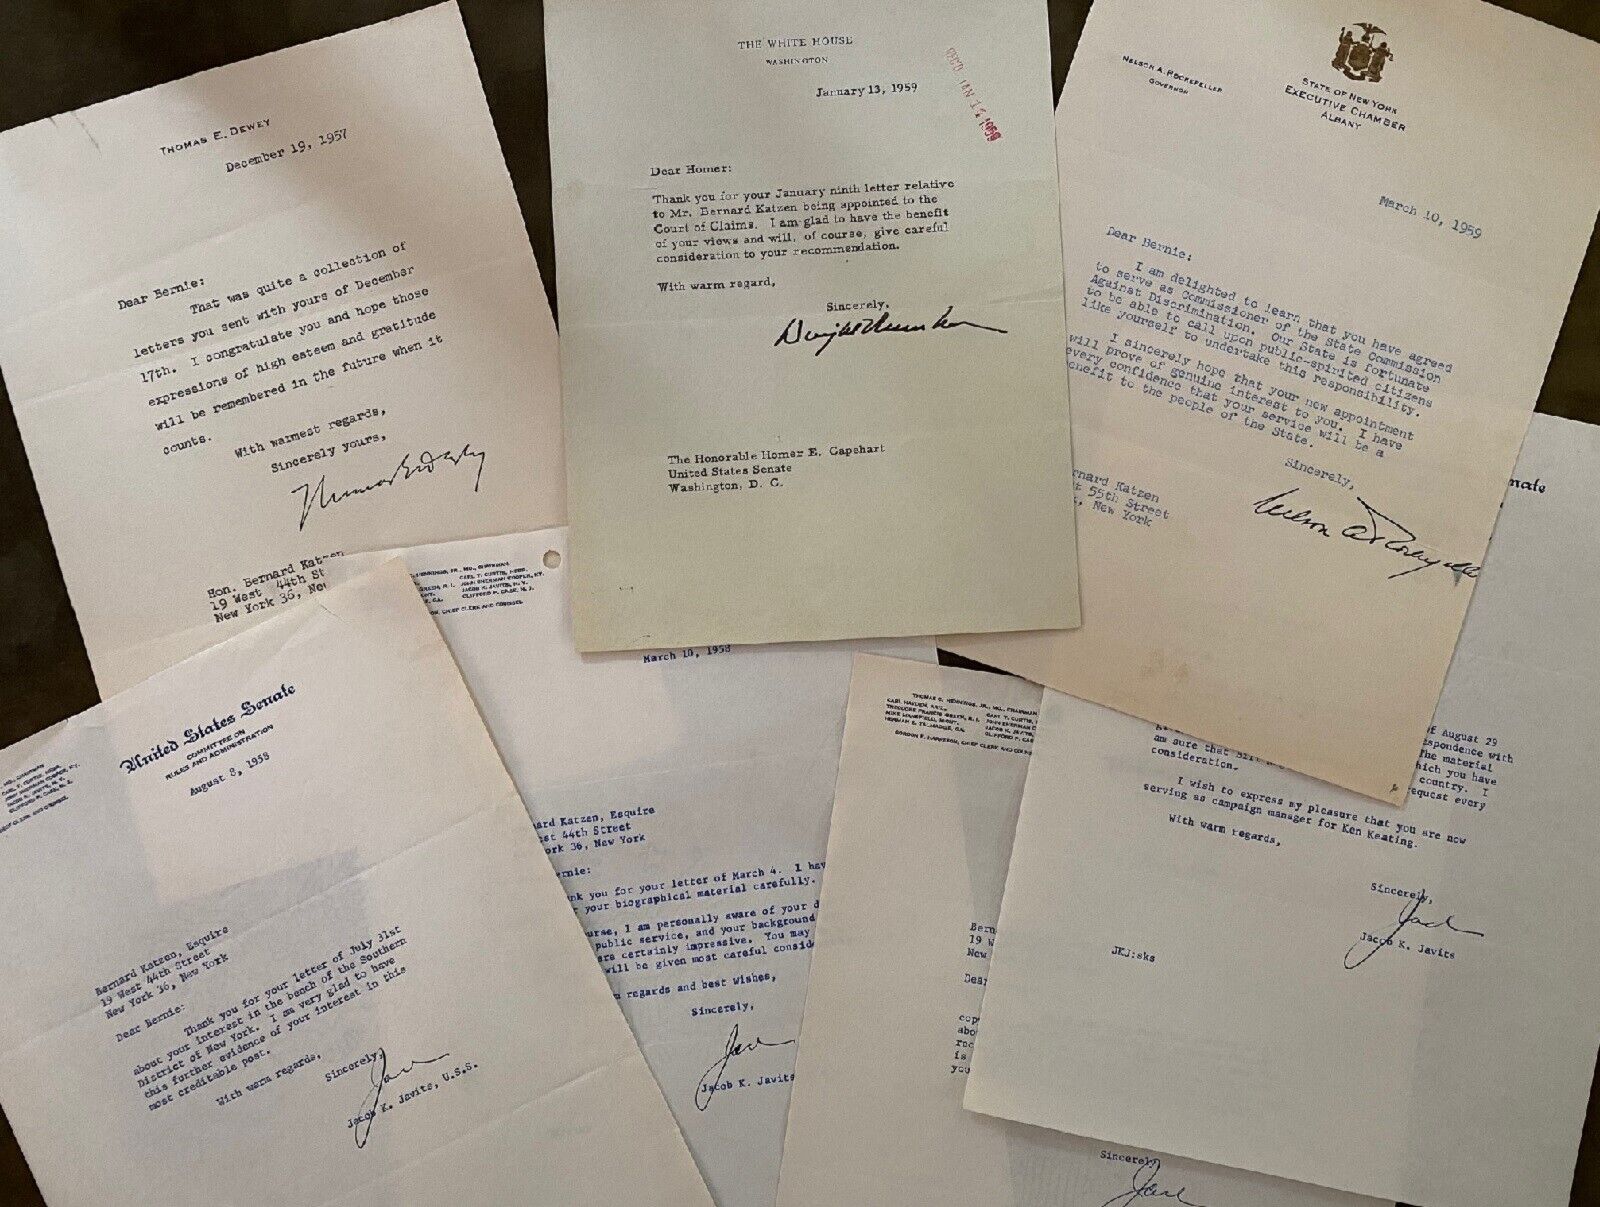 signed letters - re: appointment to job : Eisenhower, Ford, Dewey, Rockefeller